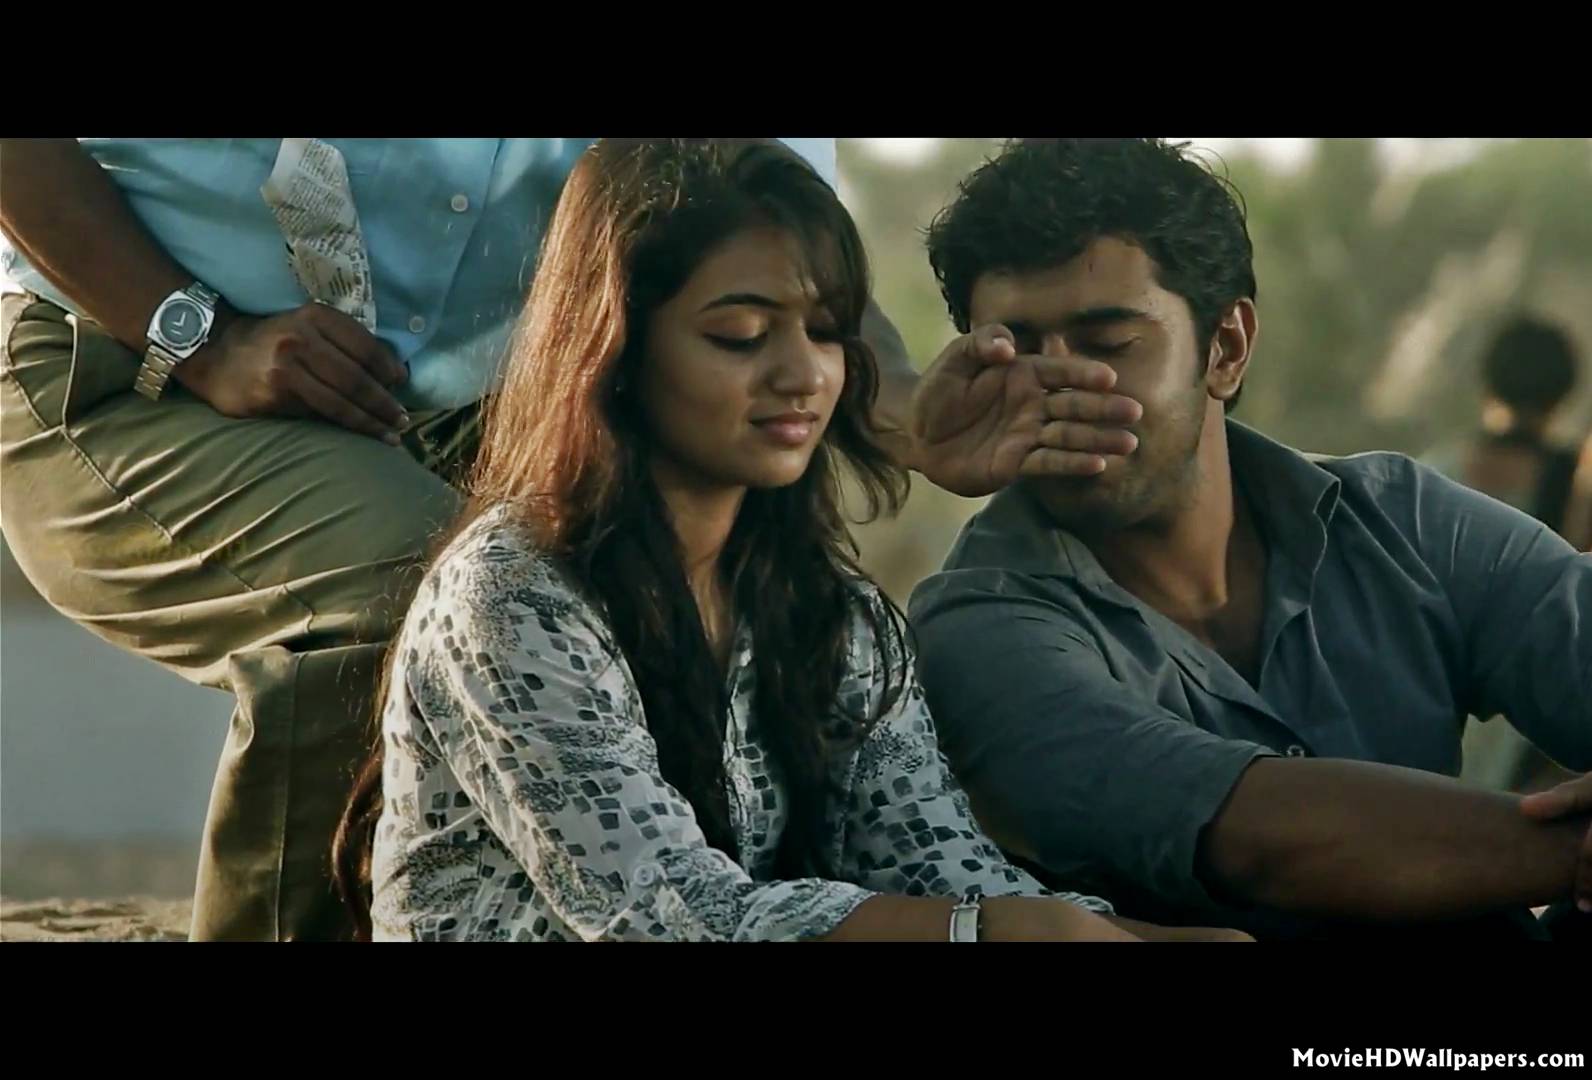 Neram tamil movie download in utorrent what does checked afterfx.exe adobe after effects cs6 torrent